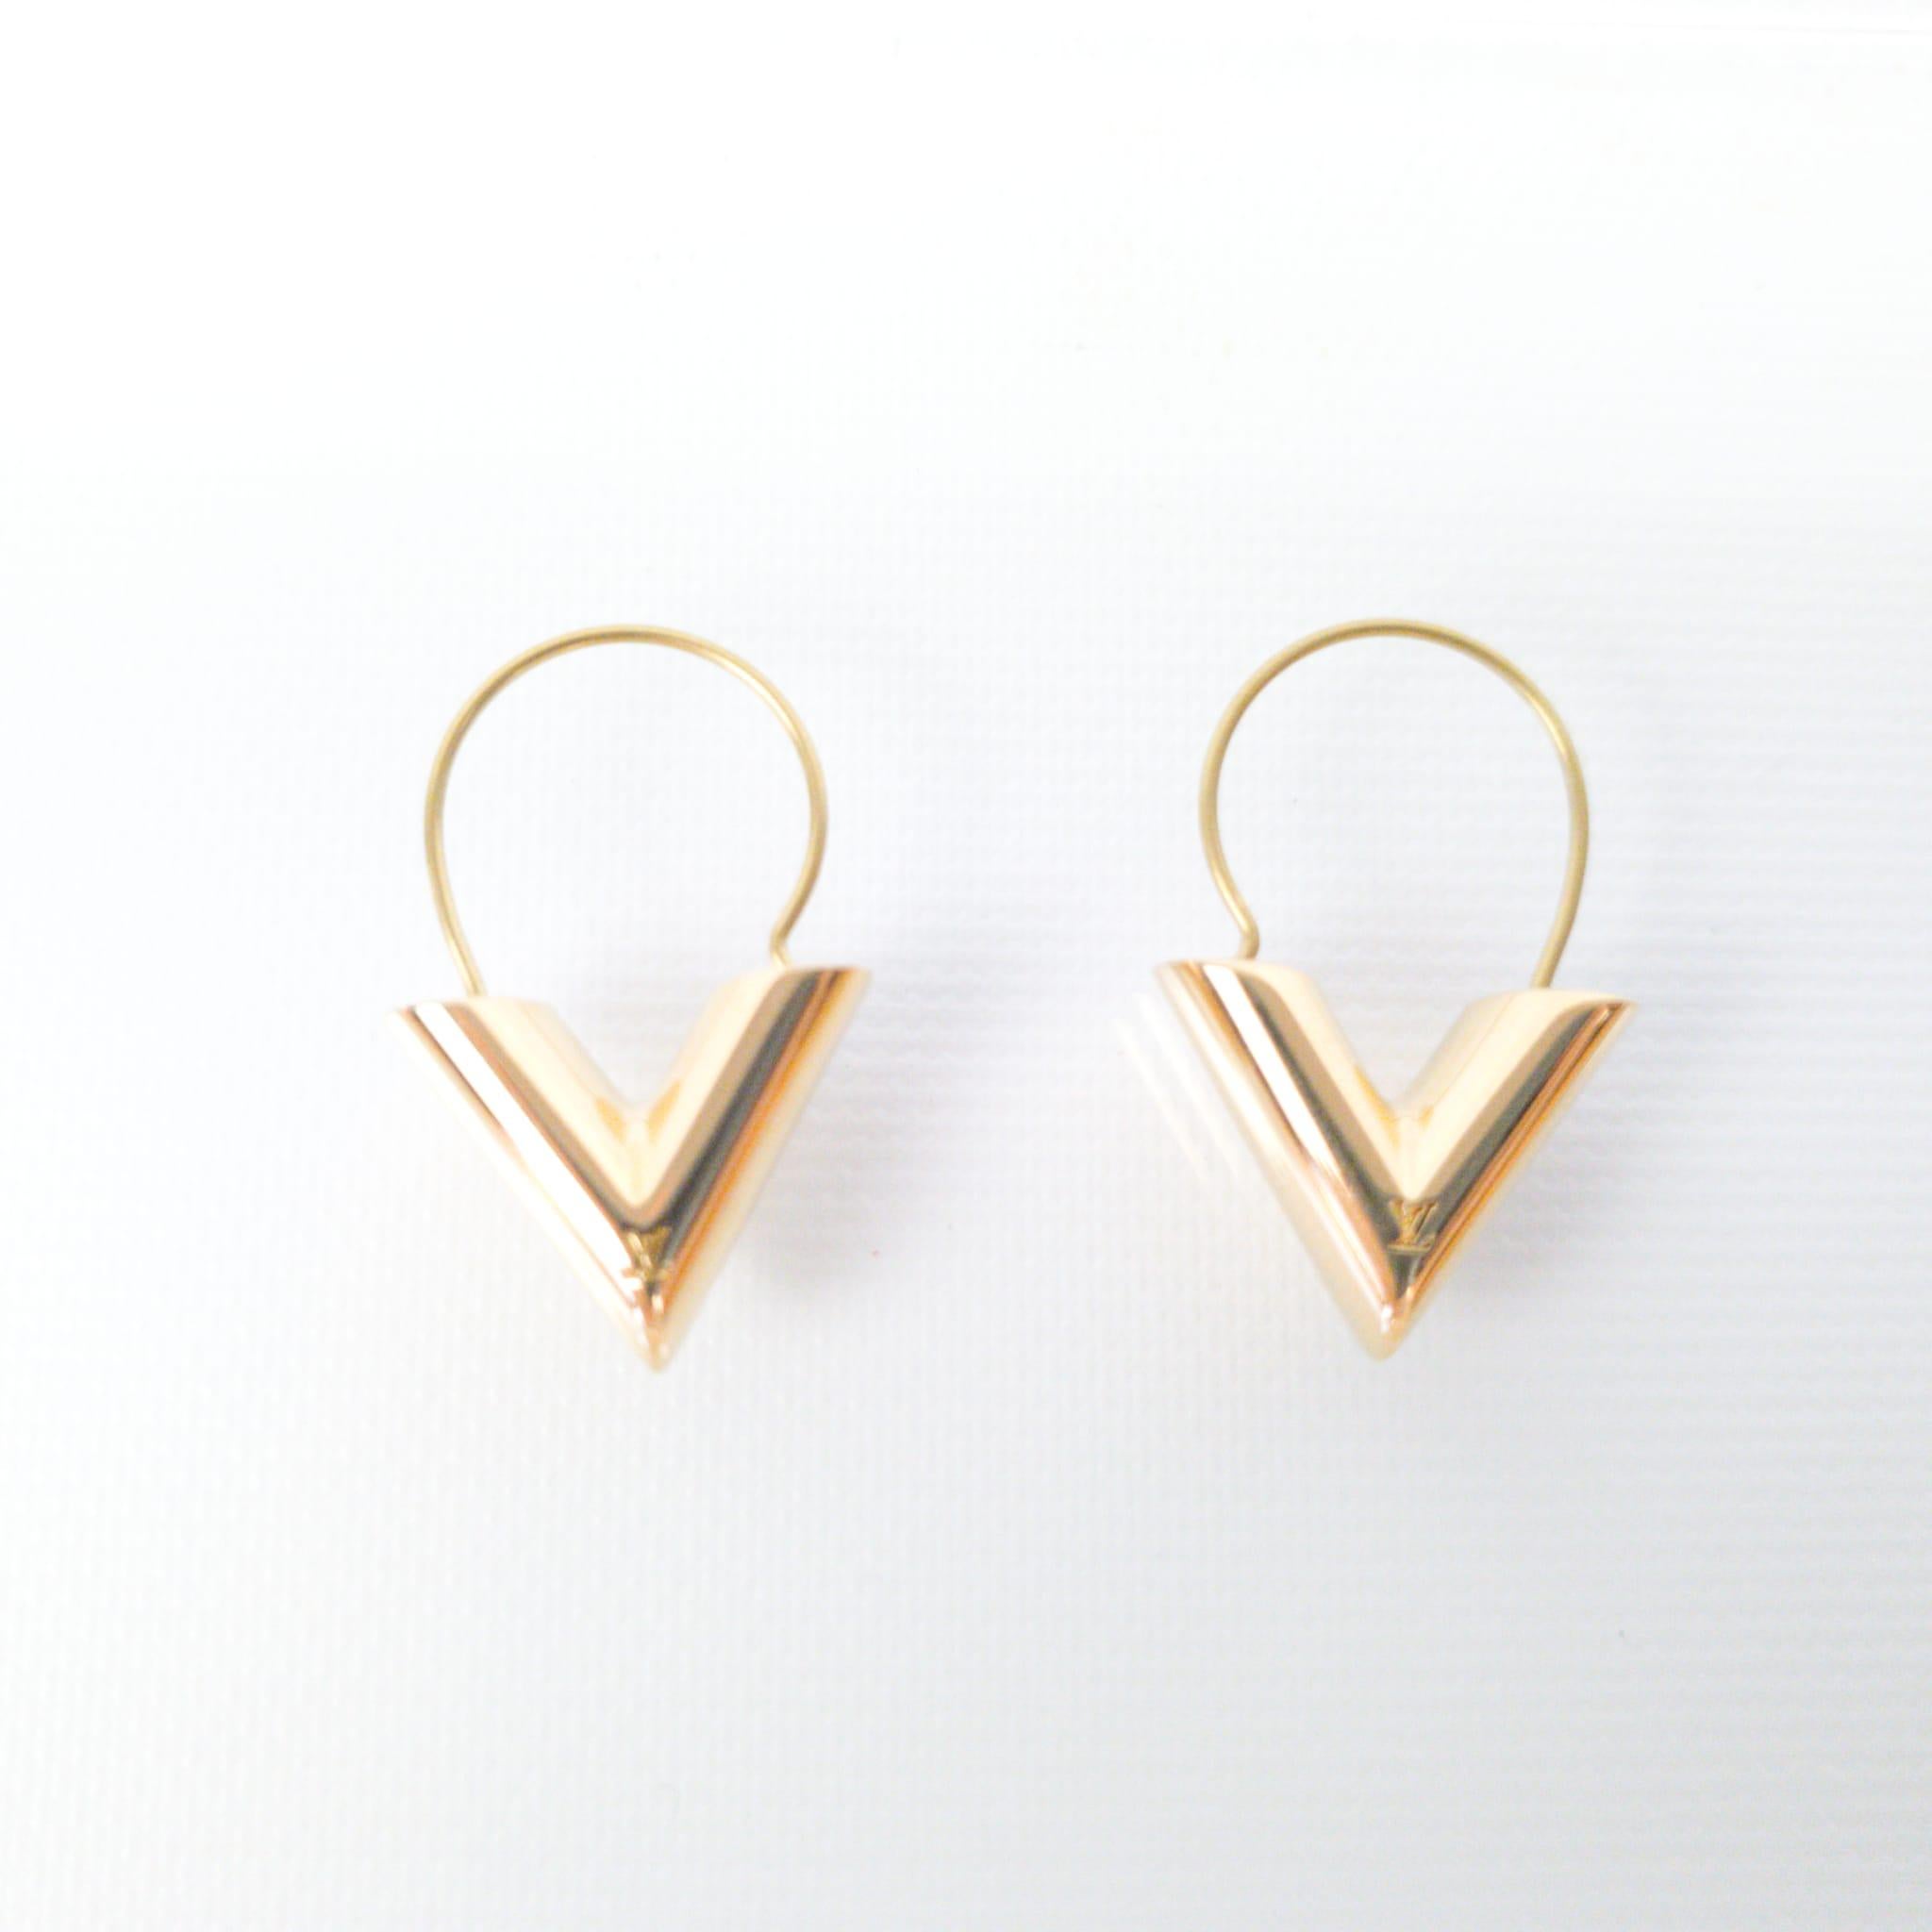 Sublimated by a discreet signature and a shiny gold finish, the Essential V earrings are in tune with the times. These versatile earrings combine Louis Vuitton's graphic V motif and LV engraving.
Length: ~0.9 cm/0.3 inches
Metal with gold-colour